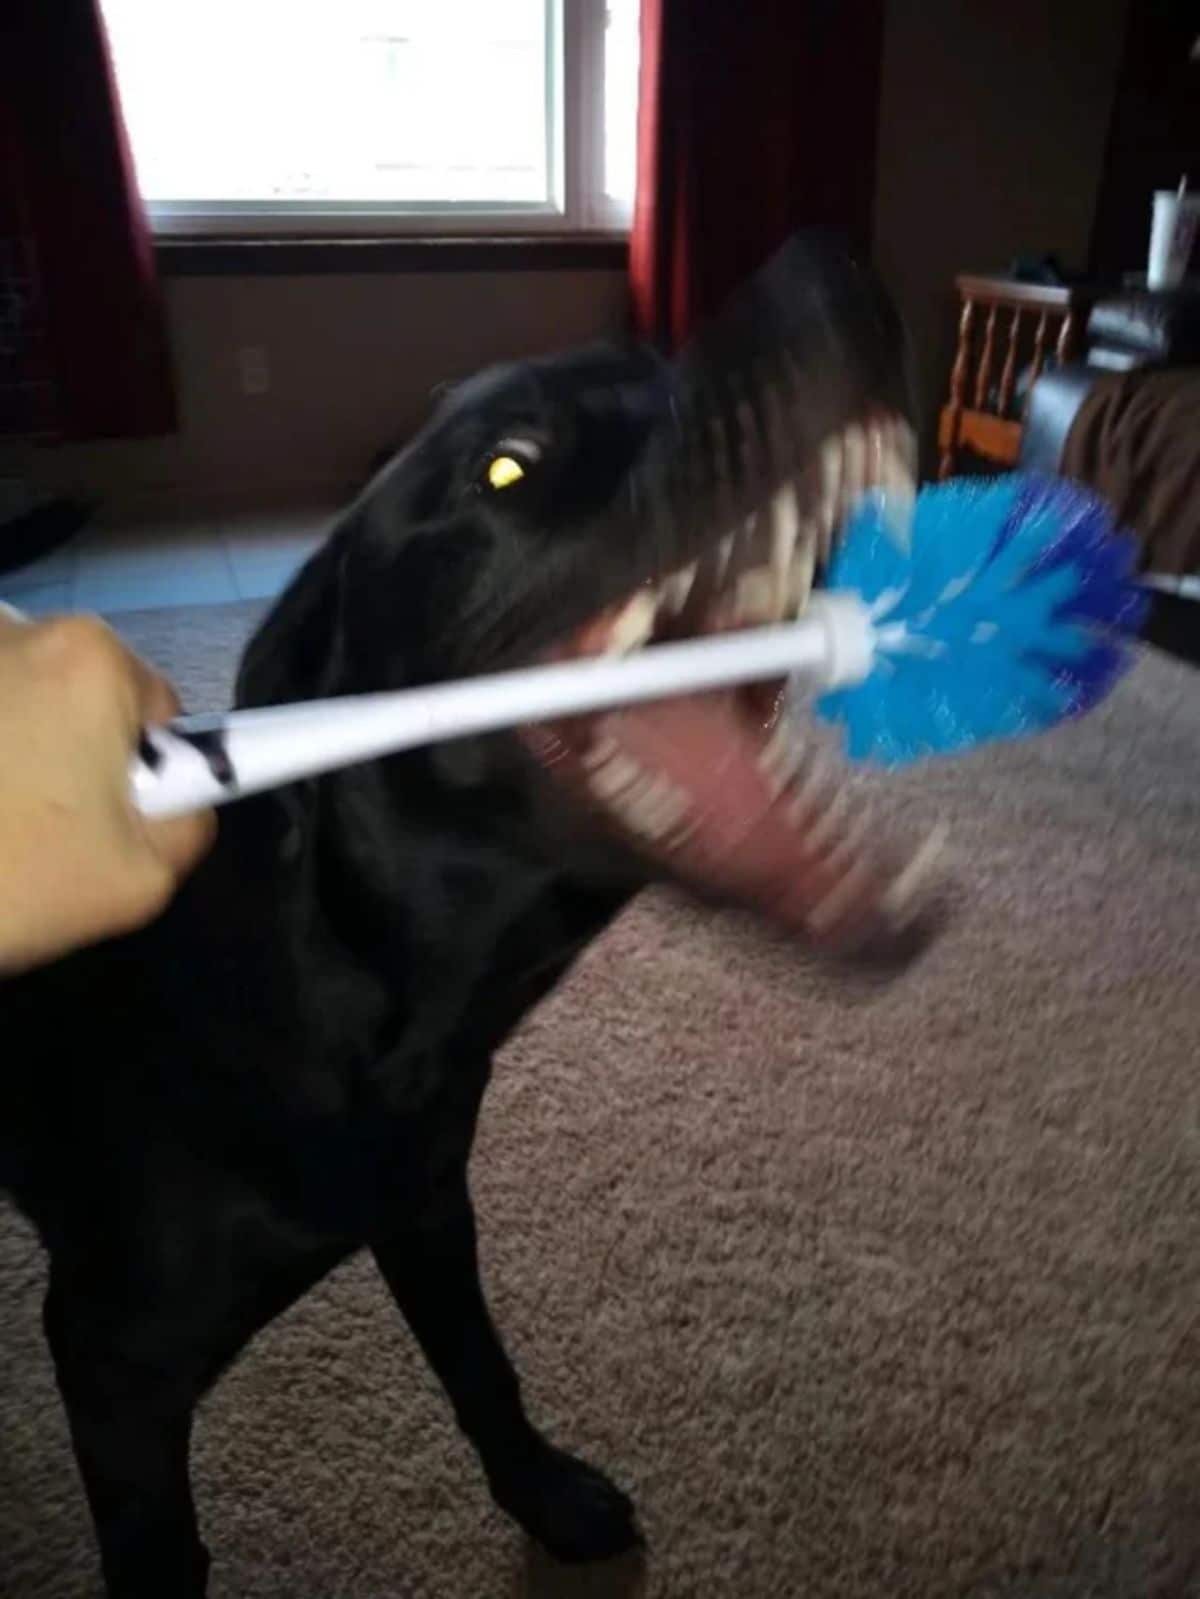 black dog caught mid movement trying to bit a white and blue toilet brush